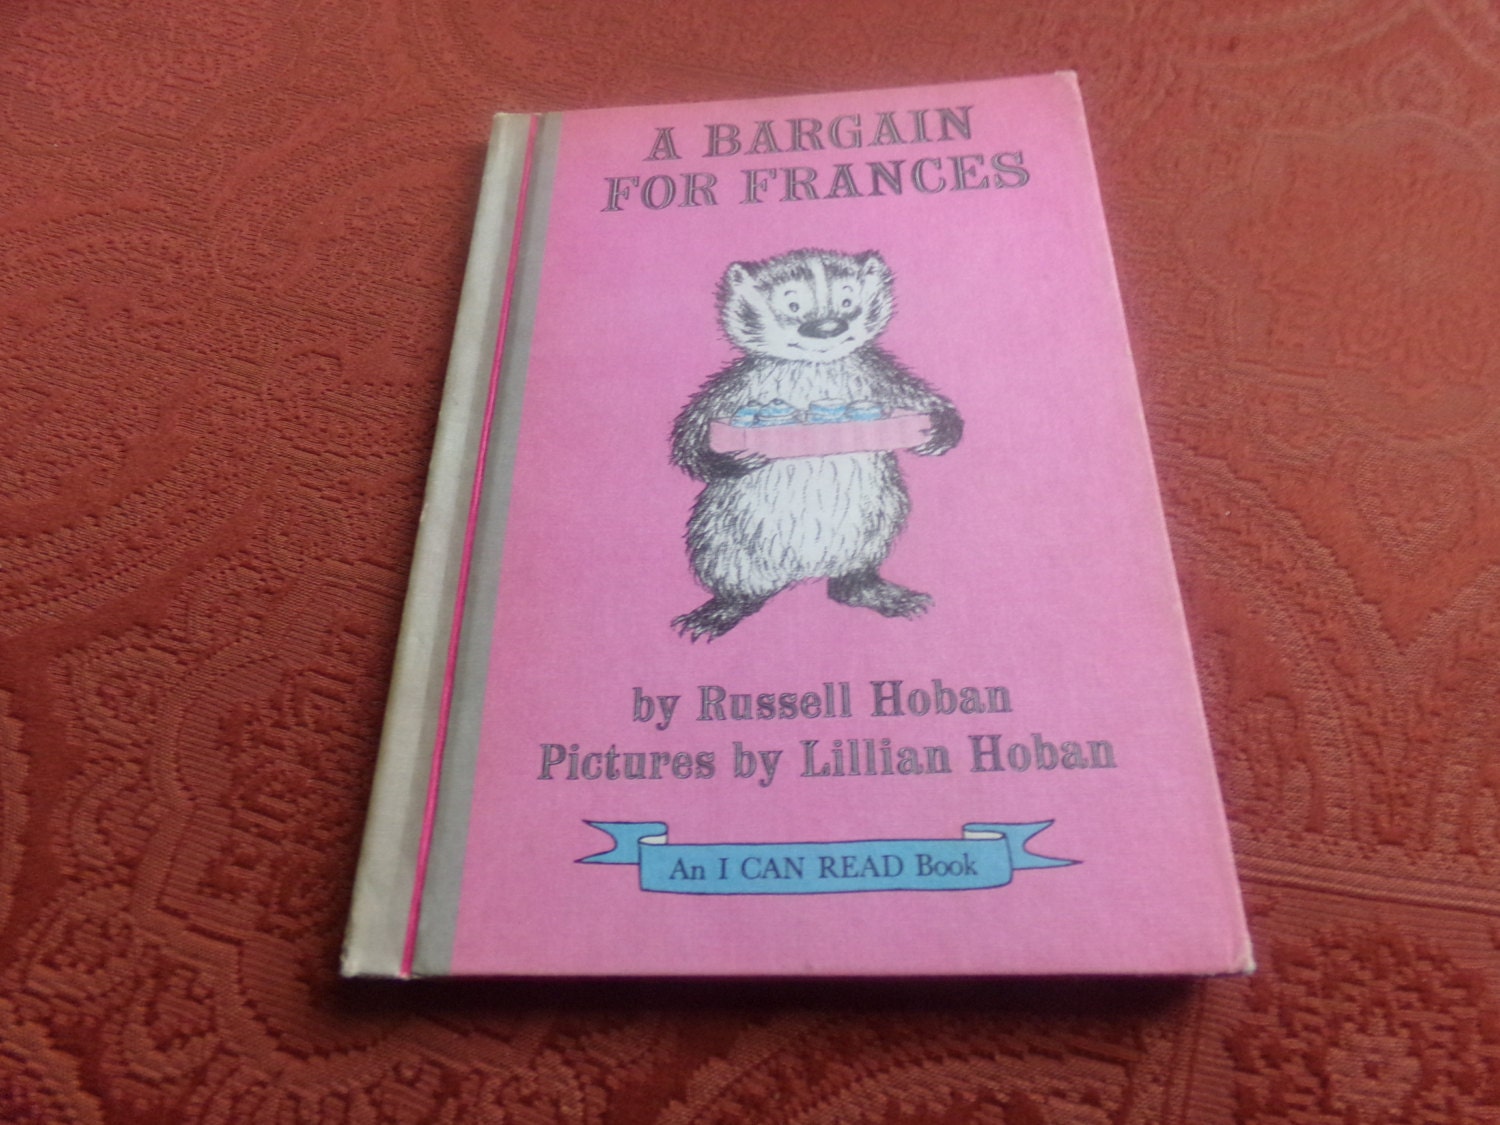 A Bargain for Frances by Russell Hoban